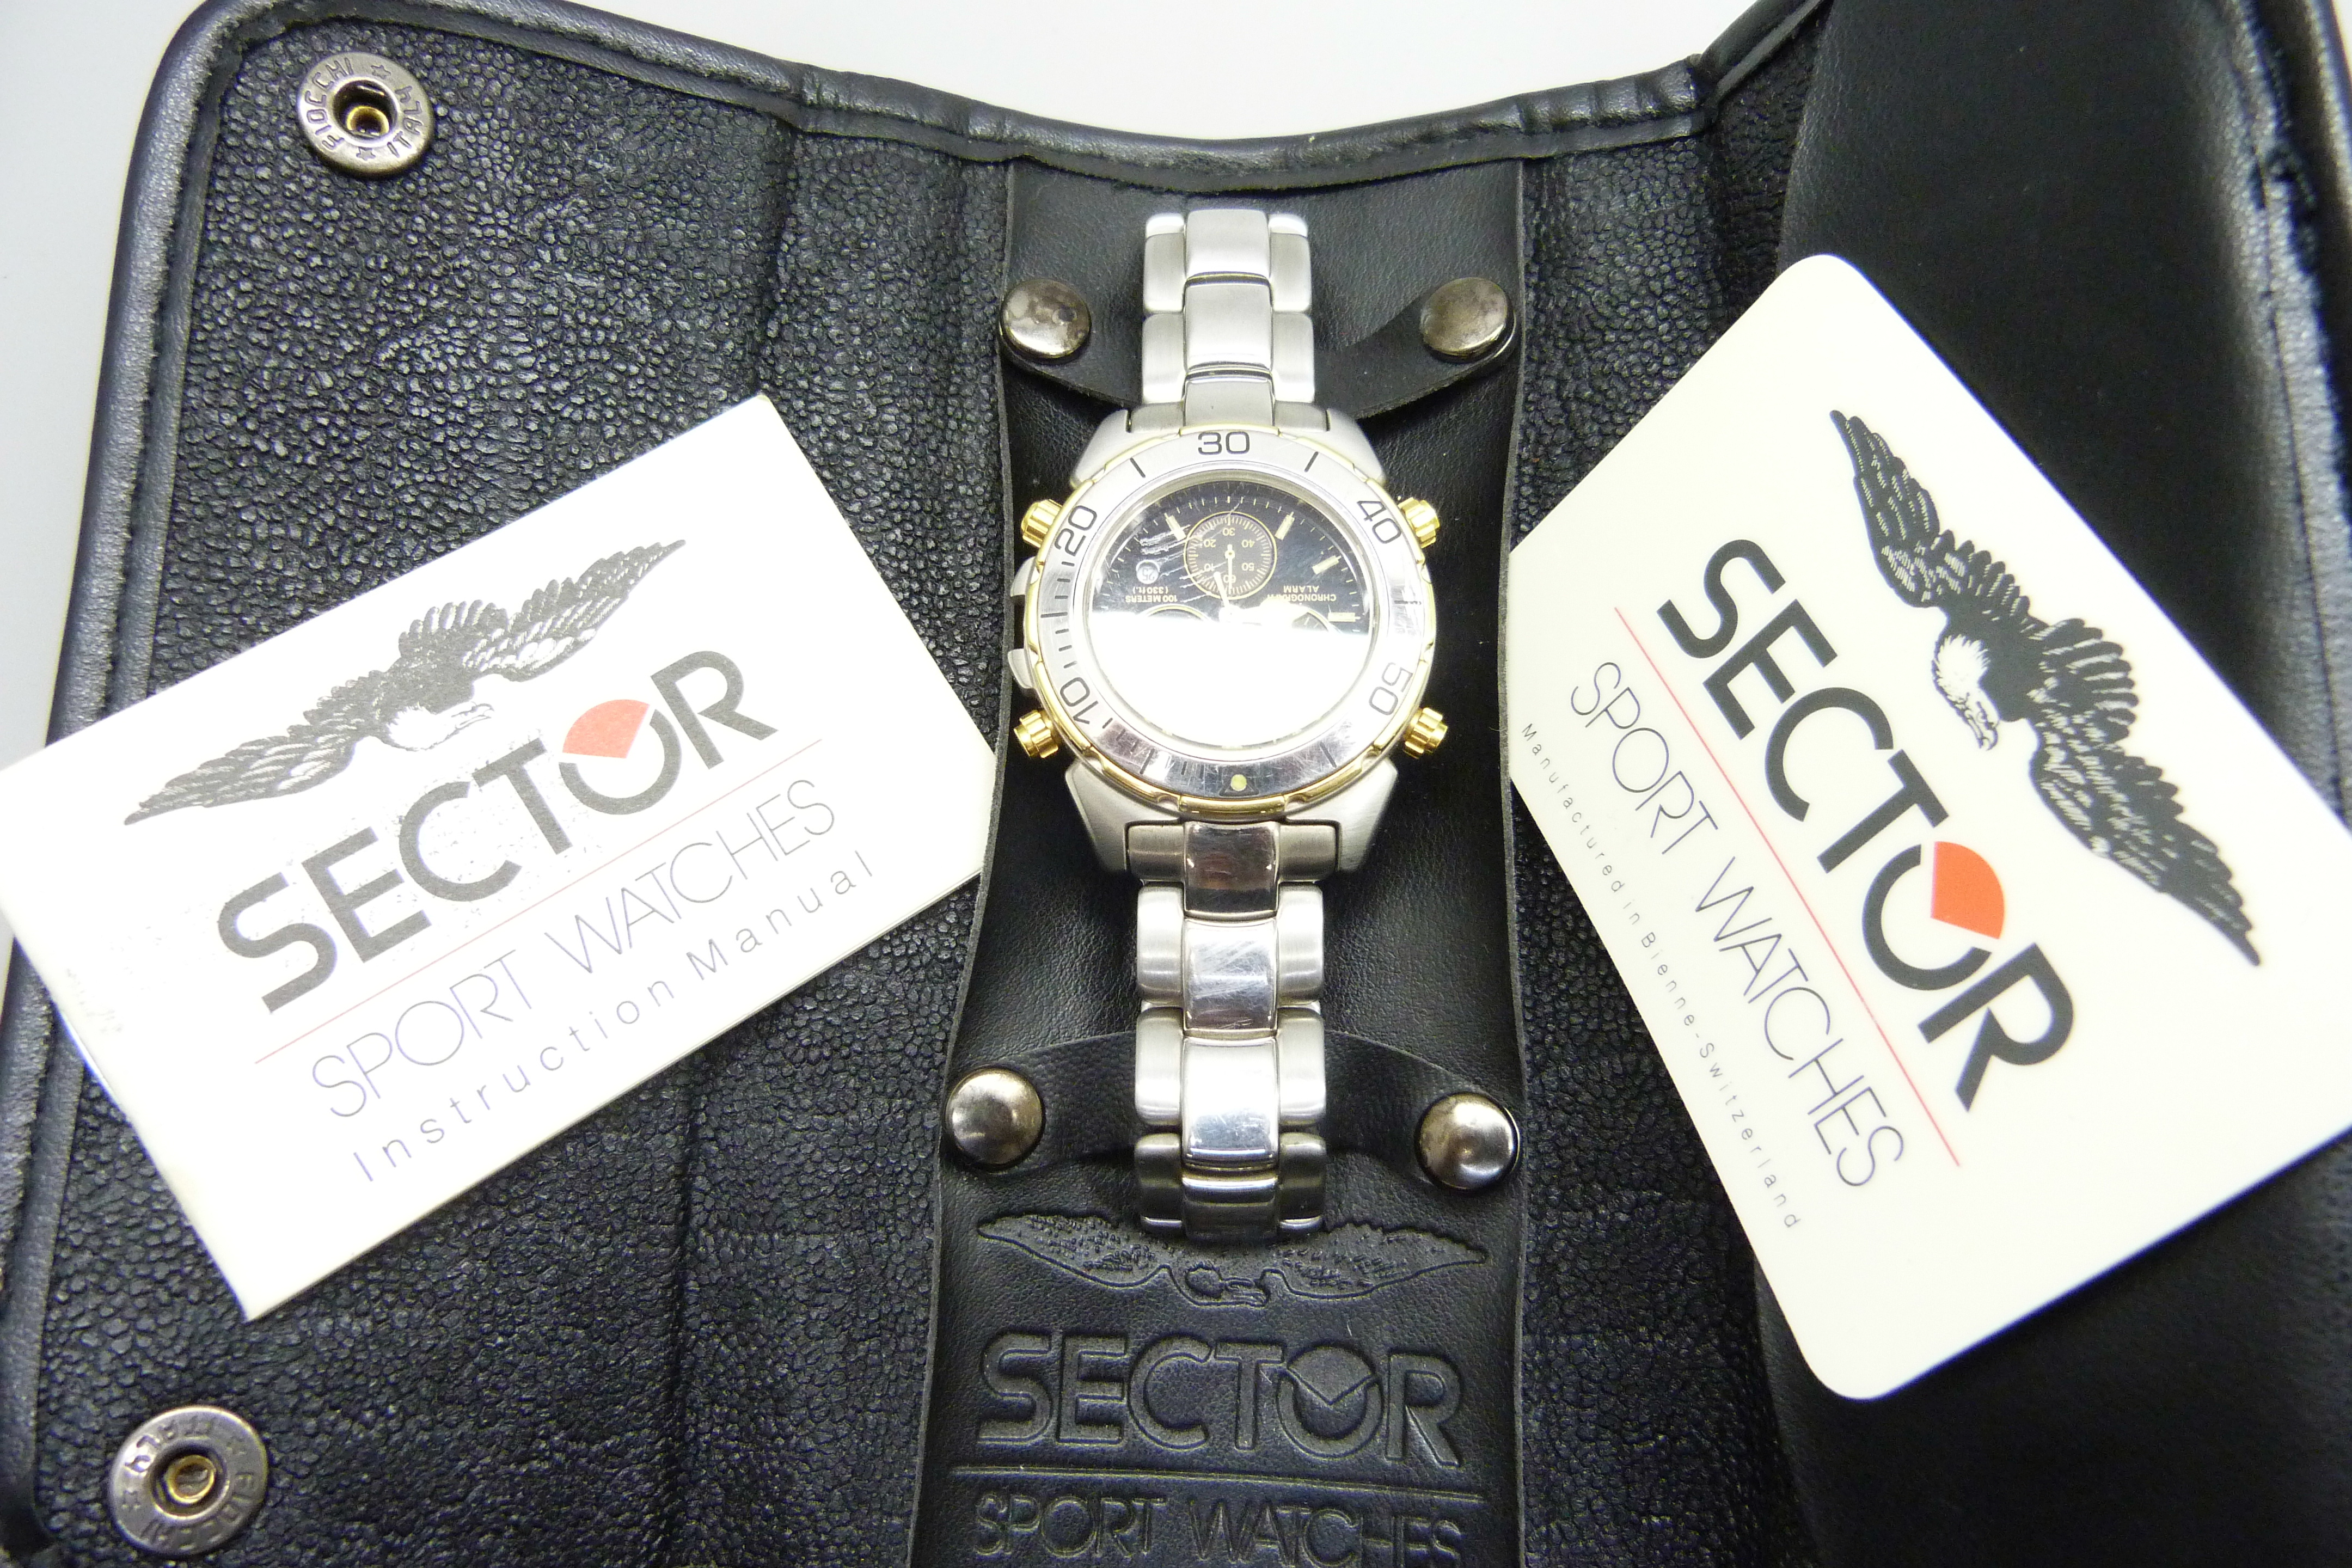 A Sector chronograph alarm wristwatch in soft pouch, with card and instructions - Image 2 of 3